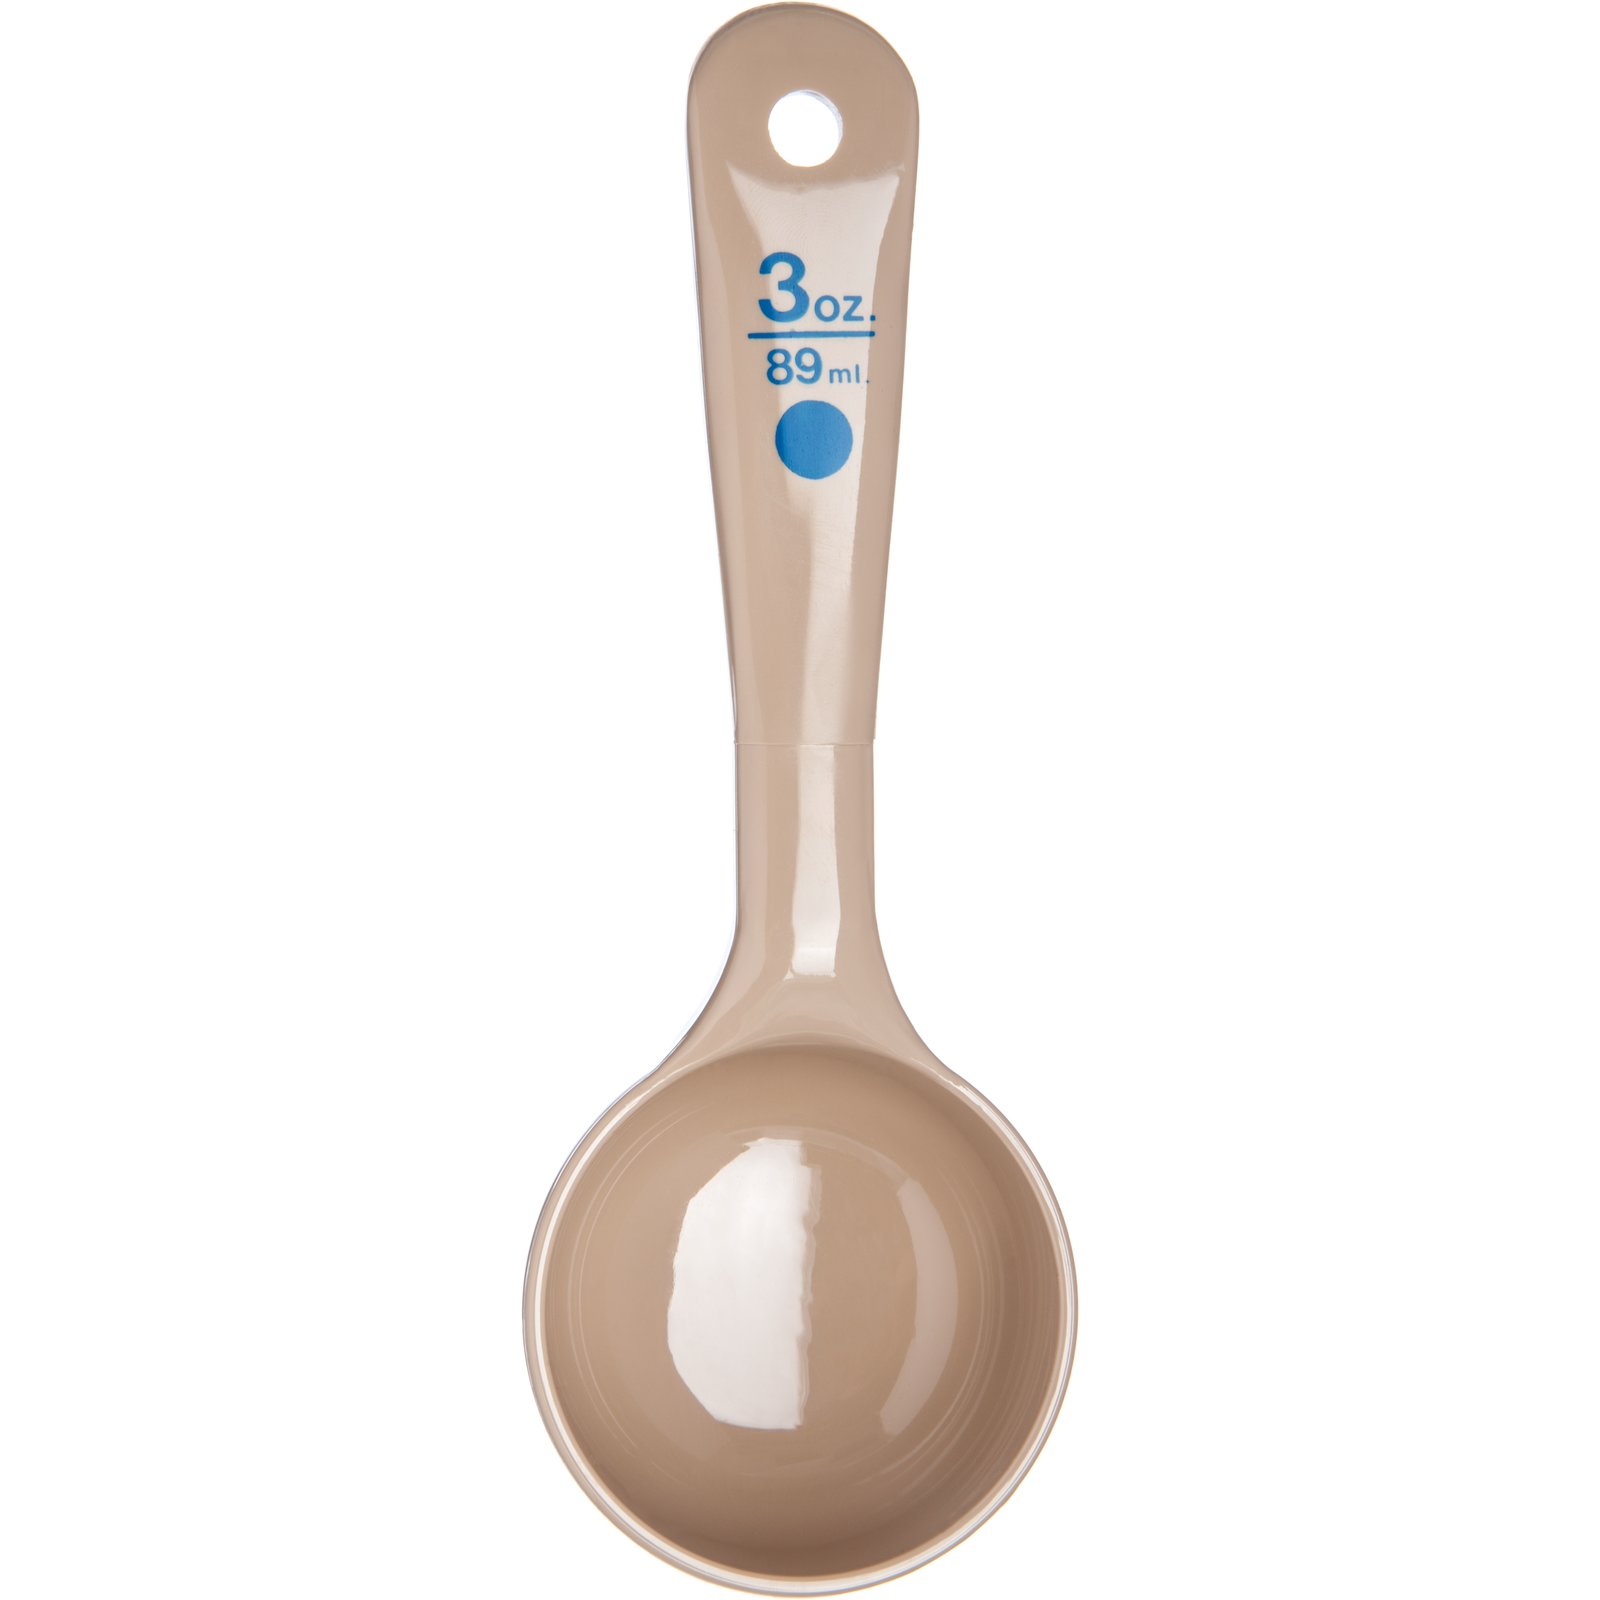 Kitchen Adventures with Tracy Independent Pampered Chef Consultant - You  can't go wrong with these measuring tools. They are the best when making  your recipes. ~Measuring Spoon Set #2308 $10.00 ~Measuring Cup